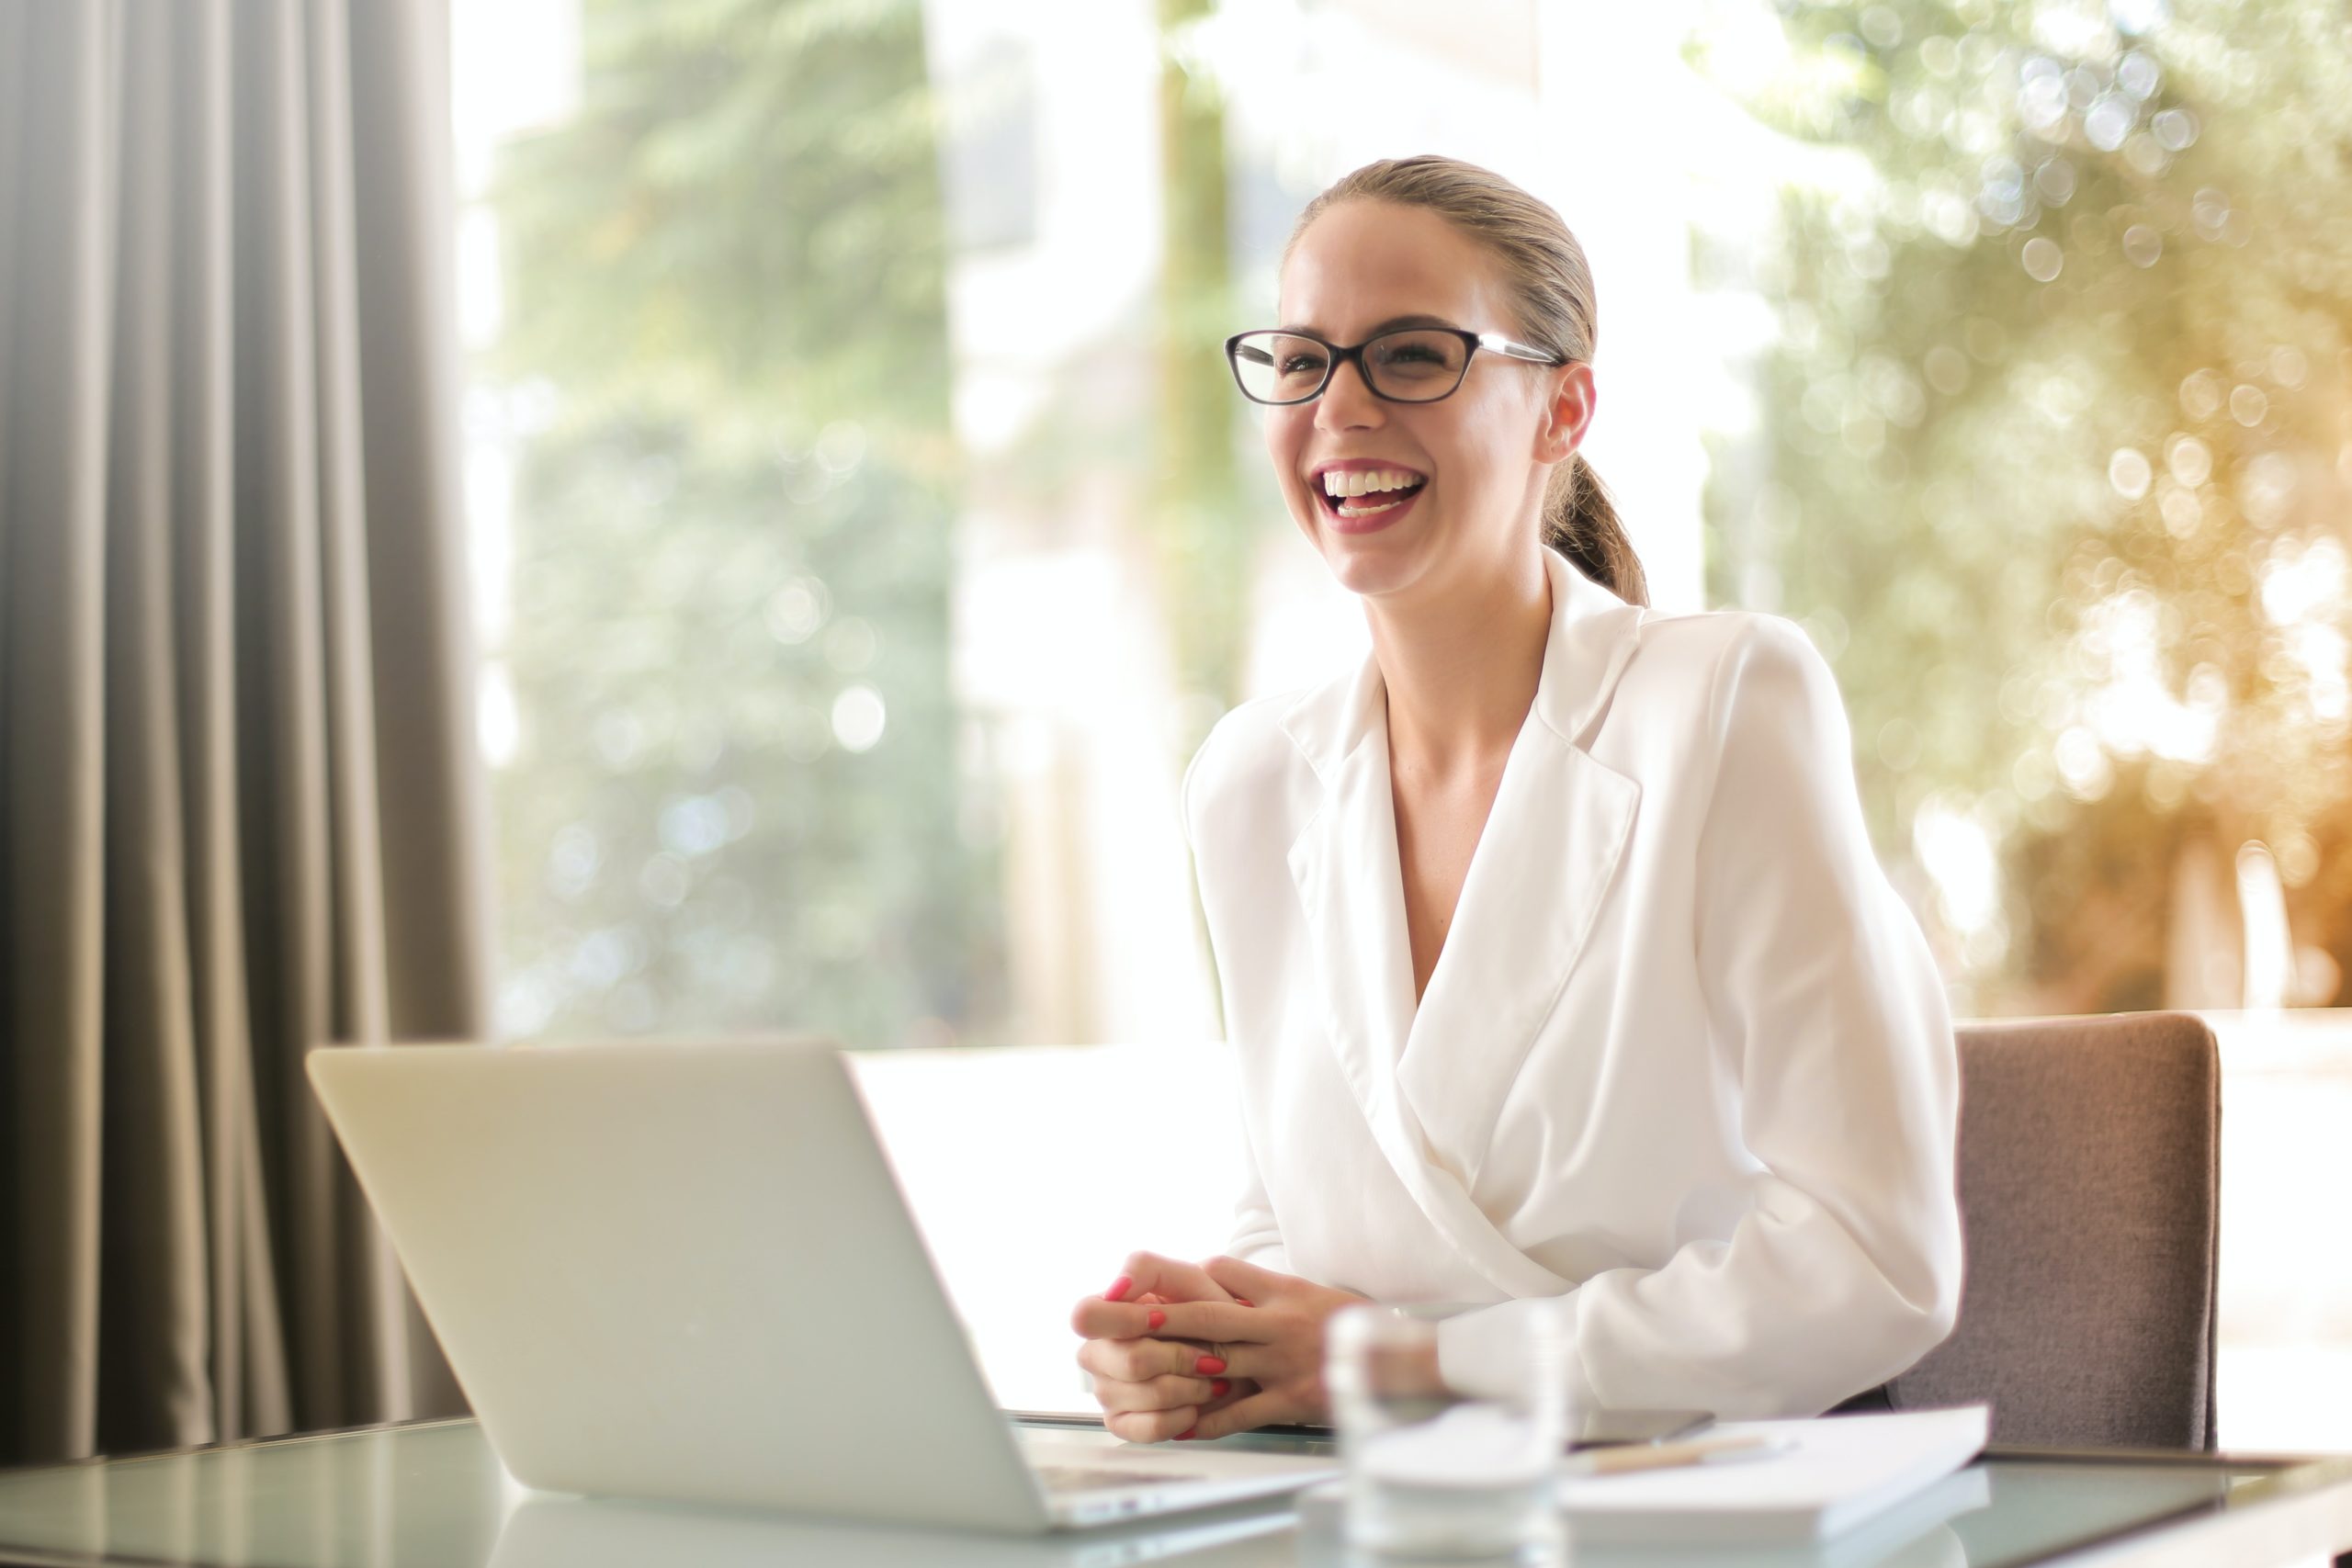 Woman smiling sitting at desk with laptop